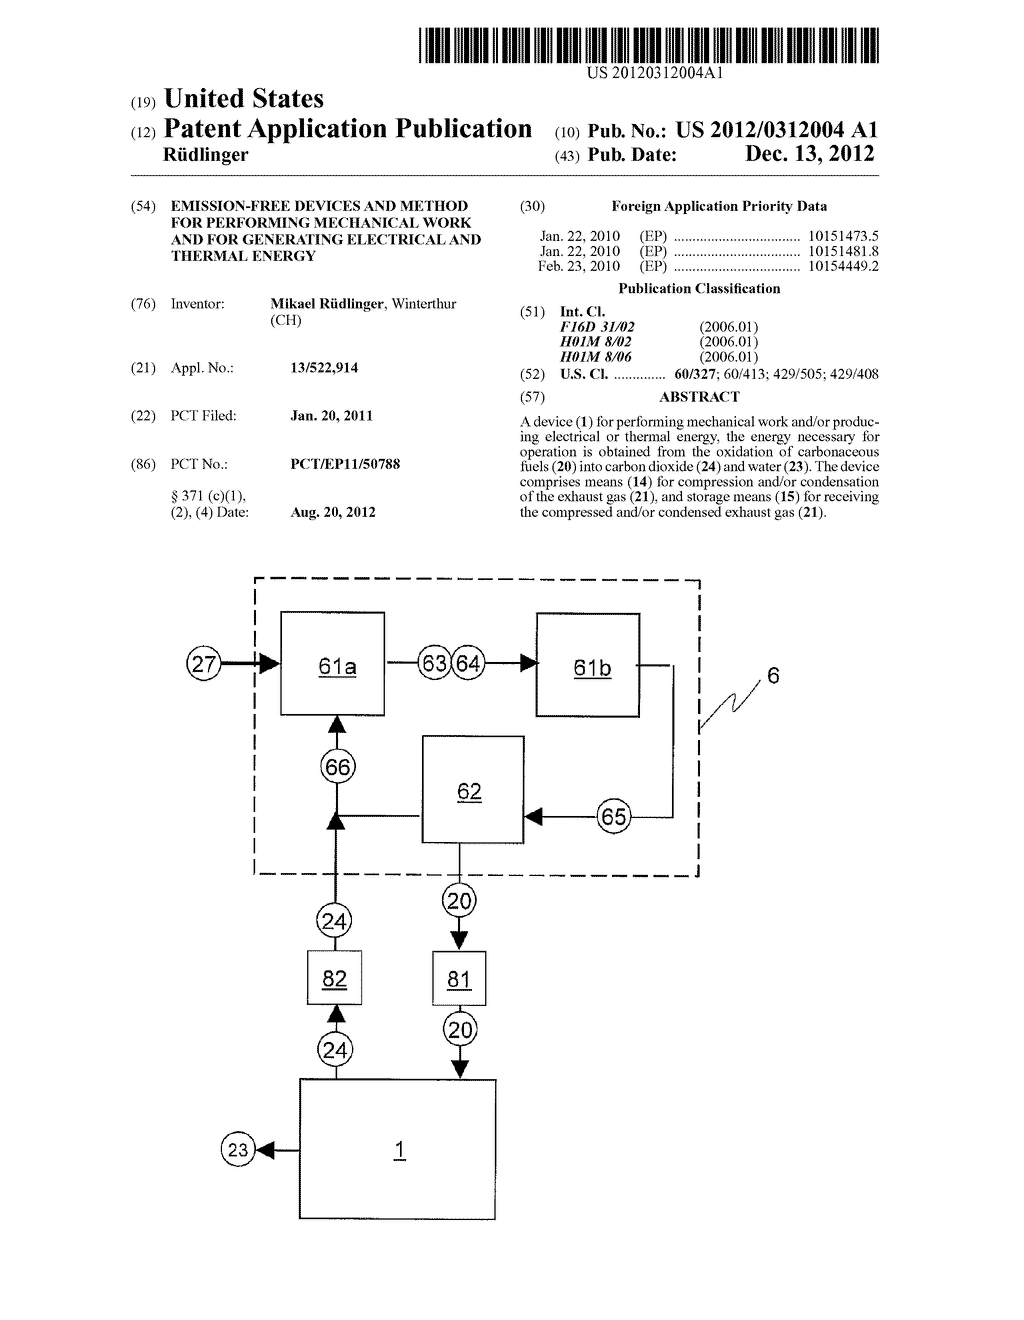 EMISSION-FREE DEVICES AND METHOD FOR PERFORMING MECHANICAL WORK AND FOR     GENERATING ELECTRICAL AND THERMAL ENERGY - diagram, schematic, and image 01